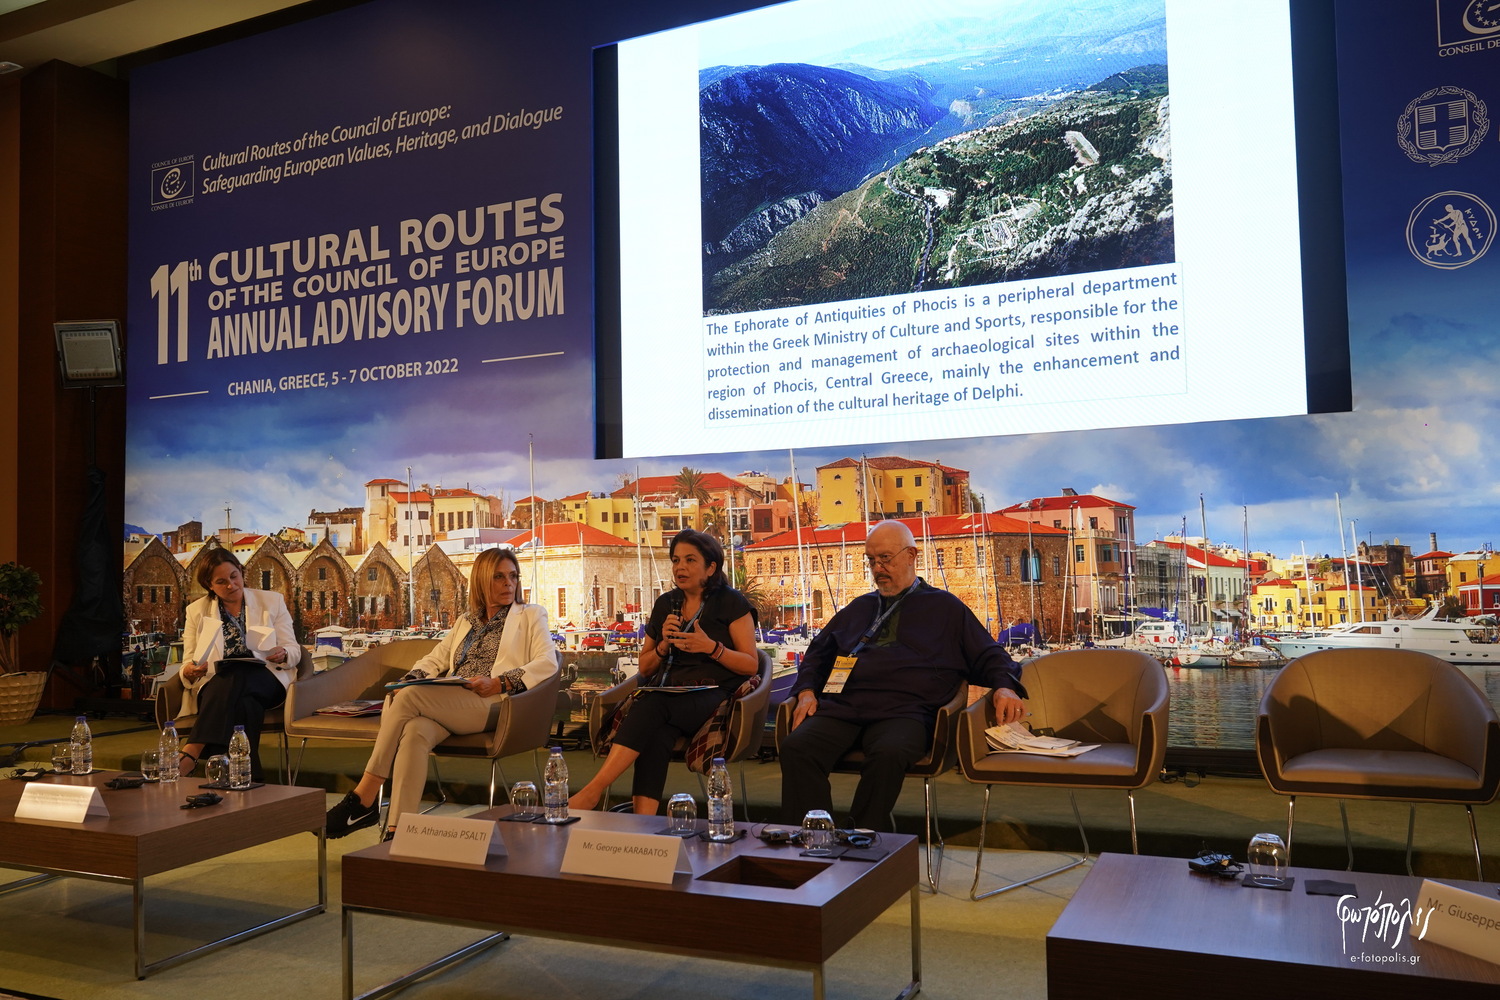 Thematic session 1: Safeguarding and promoting emblematic landscape and cultural heritage: the European Cultural Centre of Delphi, Greece as a best practice